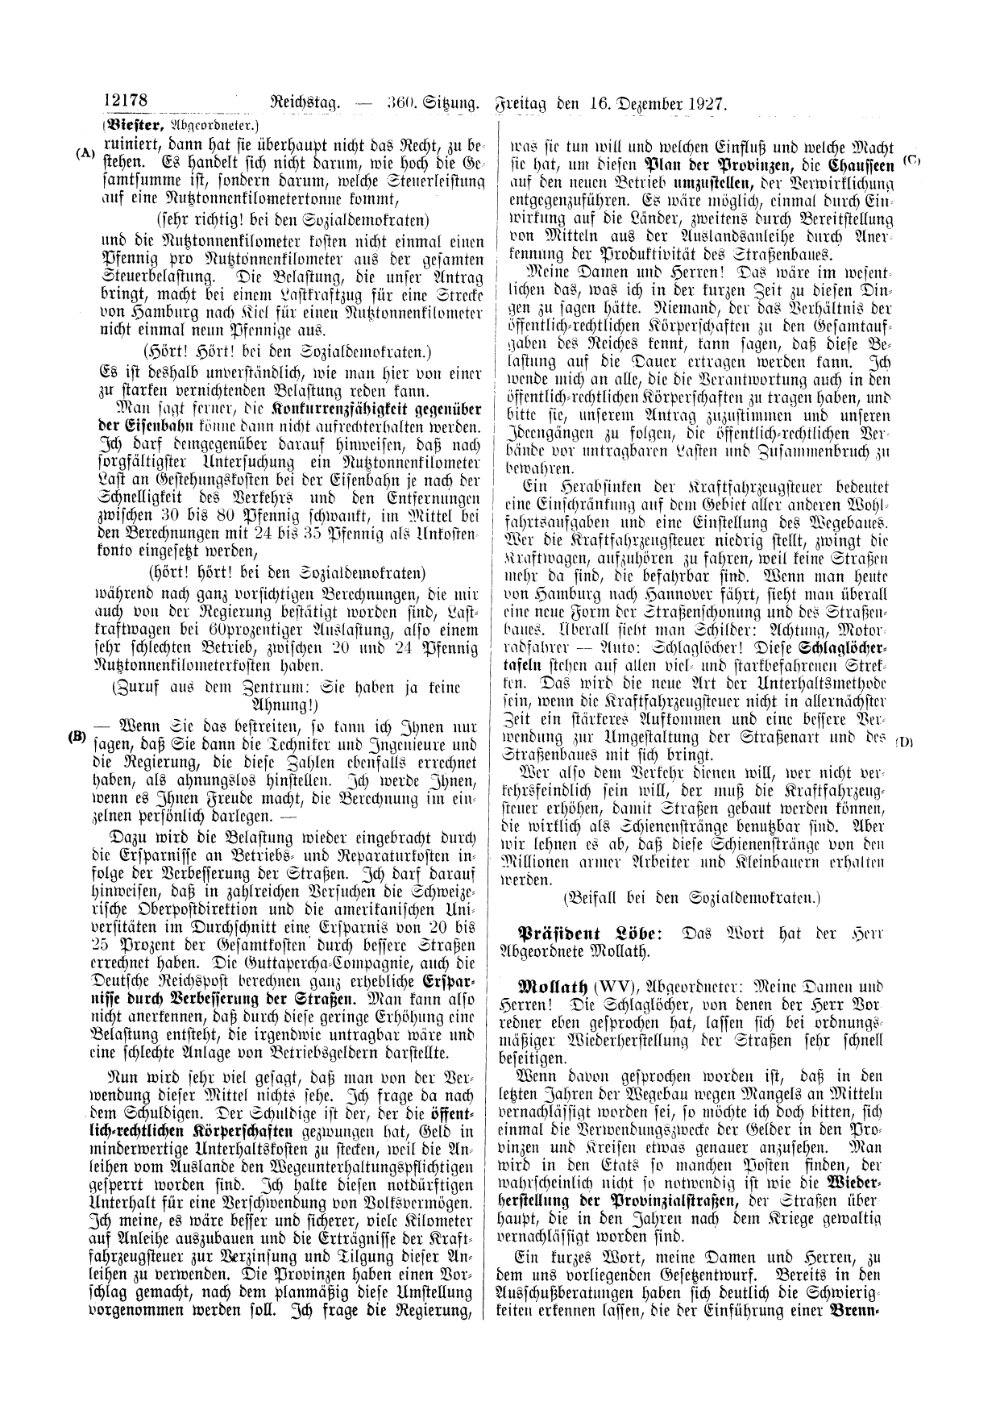 Scan of page 12178